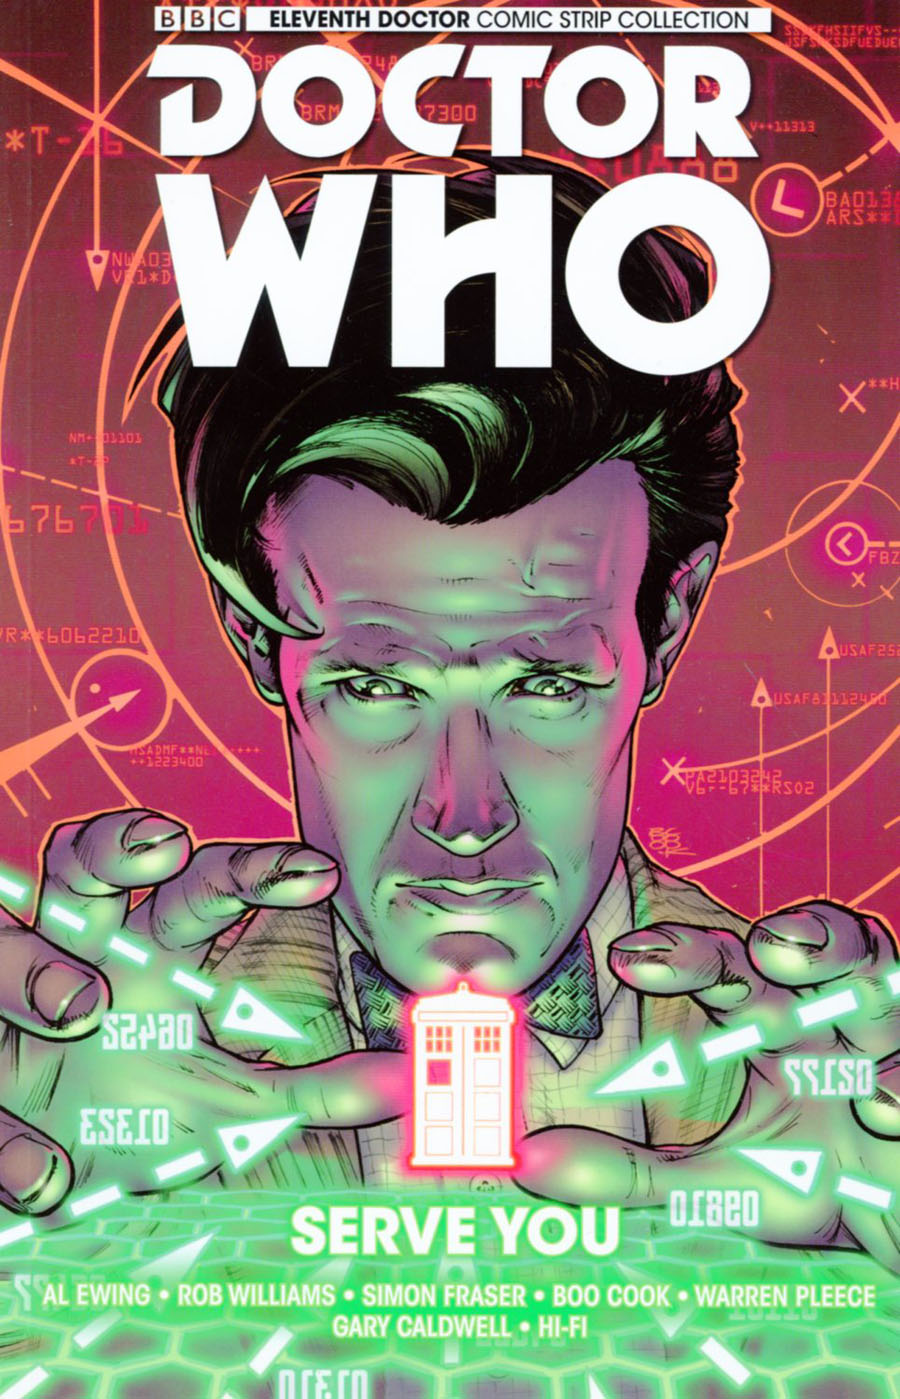 Doctor Who 11th Doctor Vol 2 Serve You TP